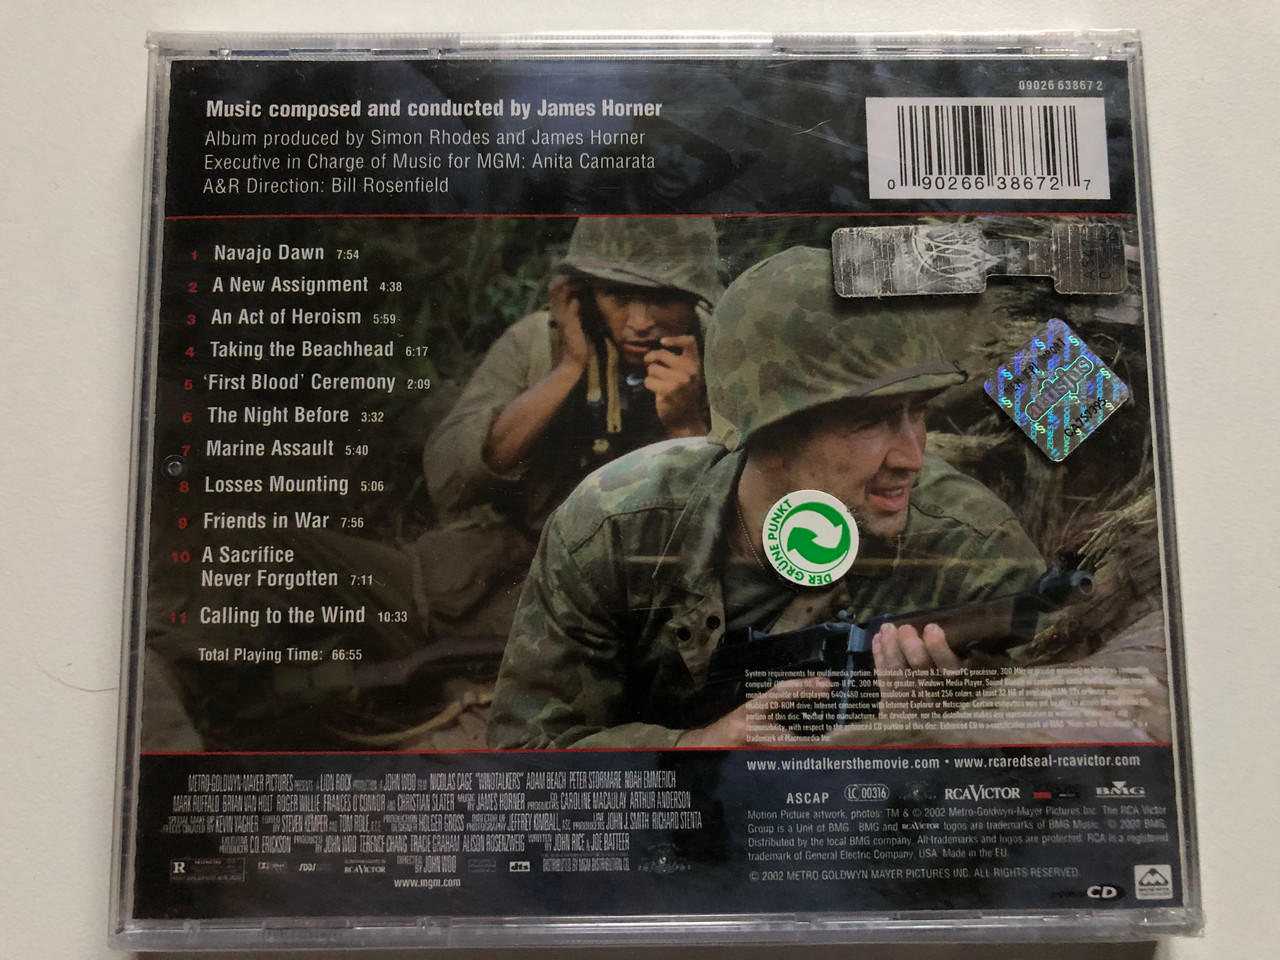 https://cdn10.bigcommerce.com/s-62bdpkt7pb/products/0/images/234950/Windtalkers_Original_Motion_Picture_Soundtrack_-_Music_Composed_and_Conducted_By_James_Horner_CD_includes_enhanced_area_featuring_movie_trailer_film_clips_interviews_RCA_Victor_Audio___39453.1655456927.1280.1280.JPG?c=2&_gl=1*1ckqjhg*_ga*MjA2NTIxMjE2MC4xNTkwNTEyNTMy*_ga_WS2VZYPC6G*MTY1NTQ1MjgxMC40NDIuMS4xNjU1NDU2NTY2LjM3